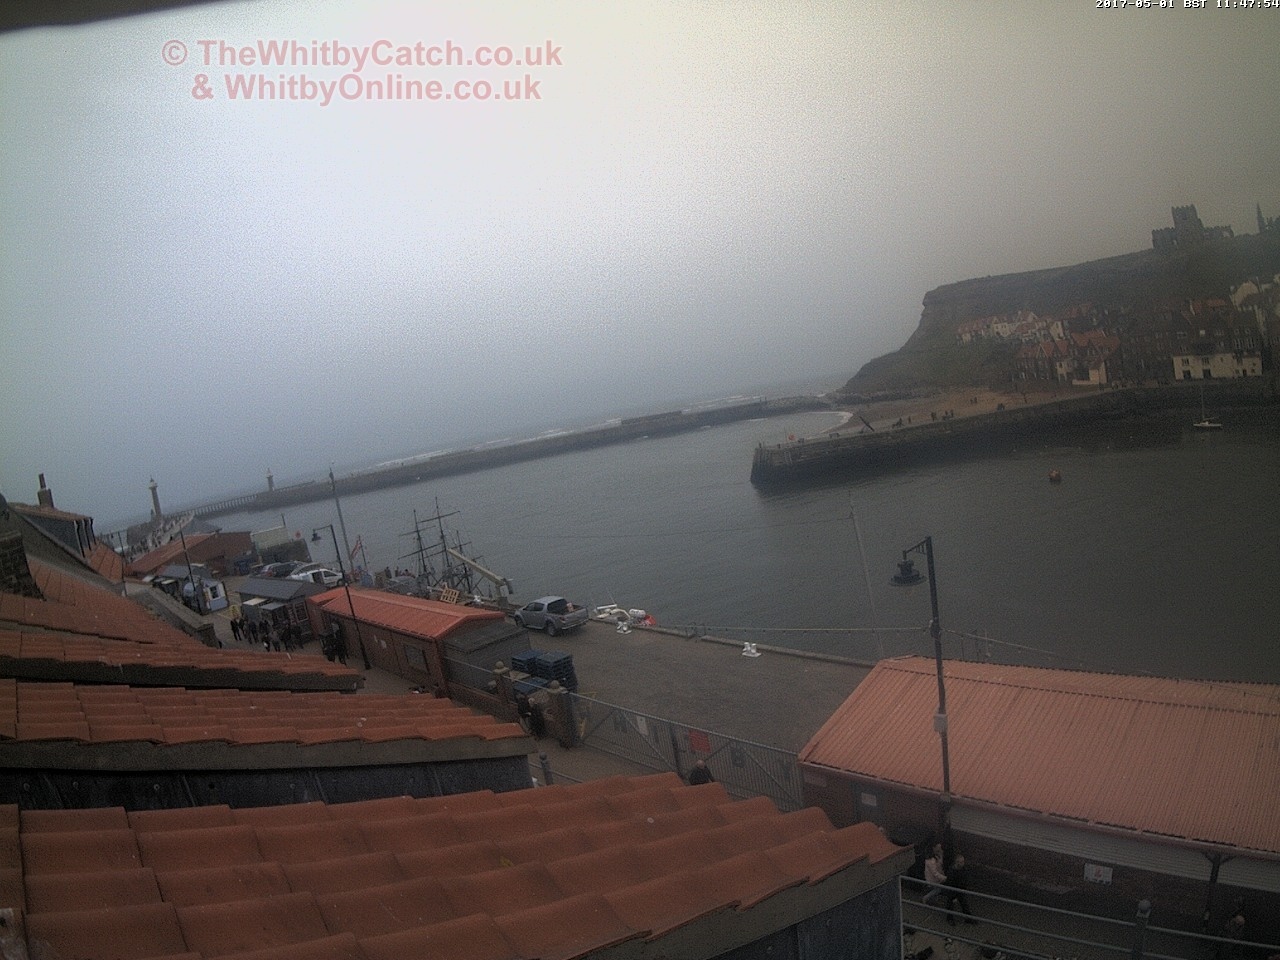 Whitby Mon 1st May 2017 11:48.